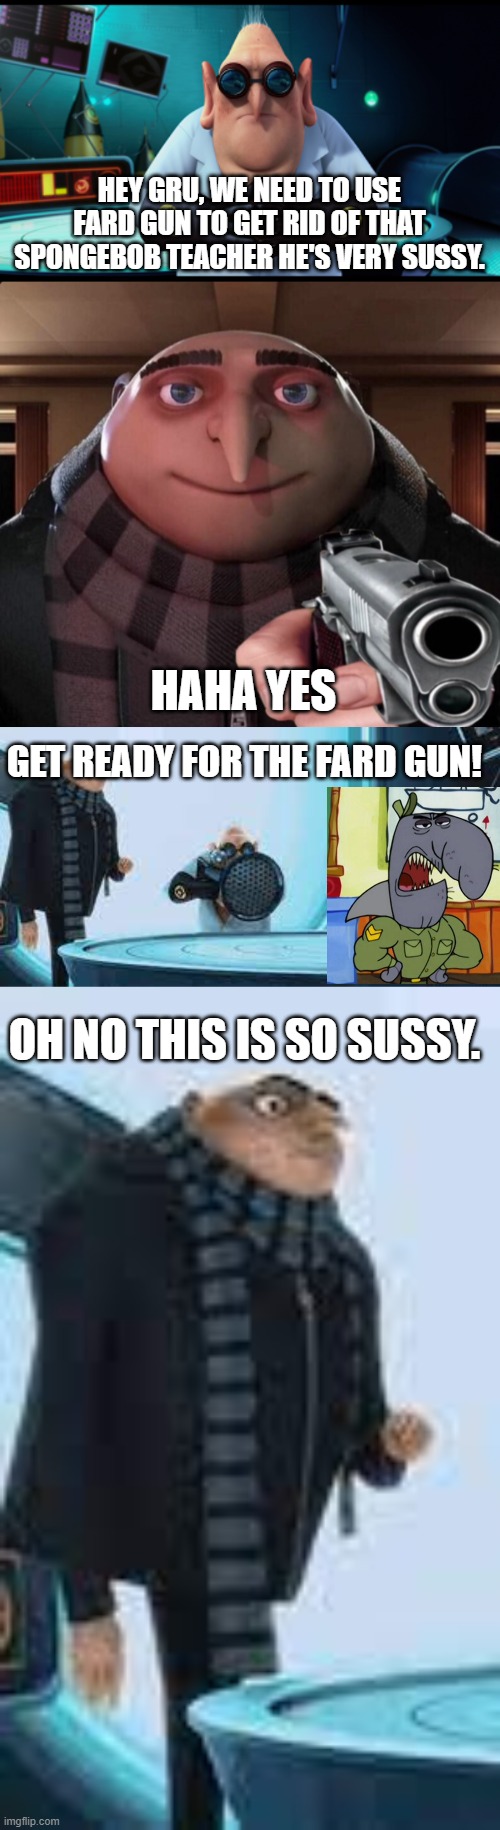 Sussy Fard Gun. |  HEY GRU, WE NEED TO USE FARD GUN TO GET RID OF THAT SPONGEBOB TEACHER HE'S VERY SUSSY. HAHA YES; GET READY FOR THE FARD GUN! OH NO THIS IS SO SUSSY. | image tagged in funny memes | made w/ Imgflip meme maker